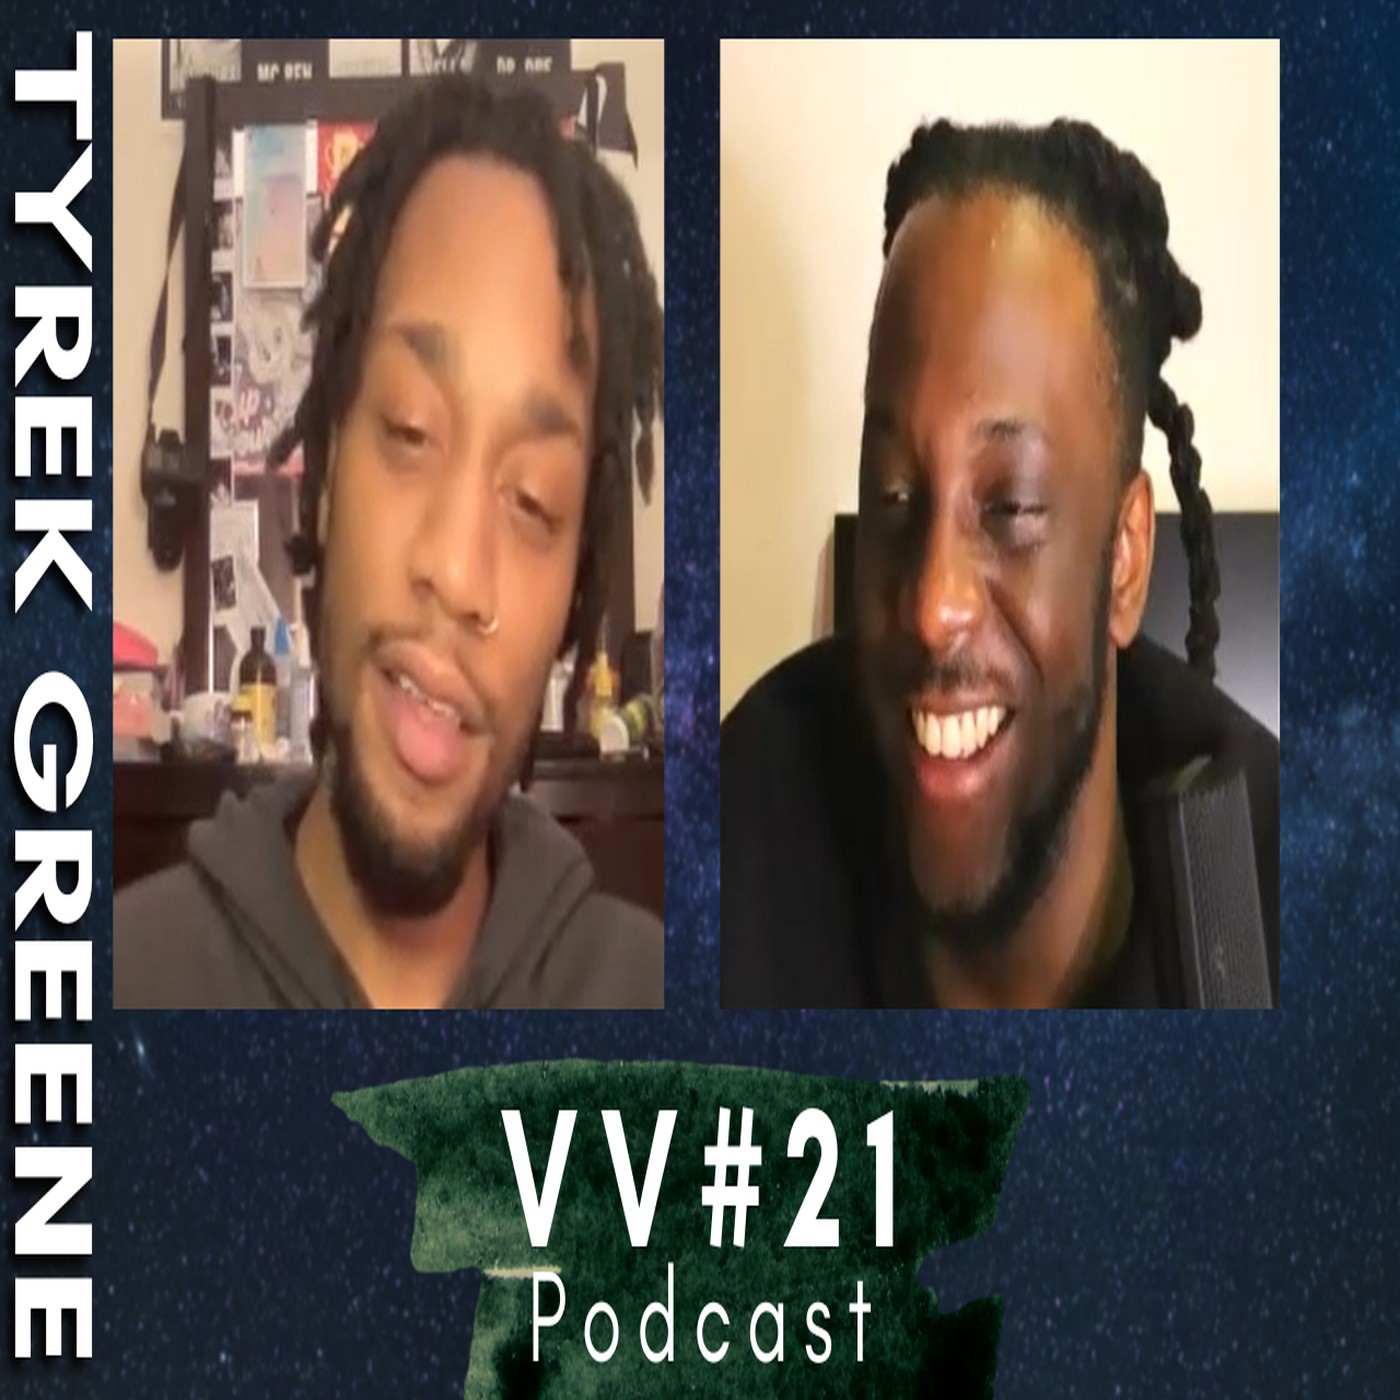 The VV Podcast